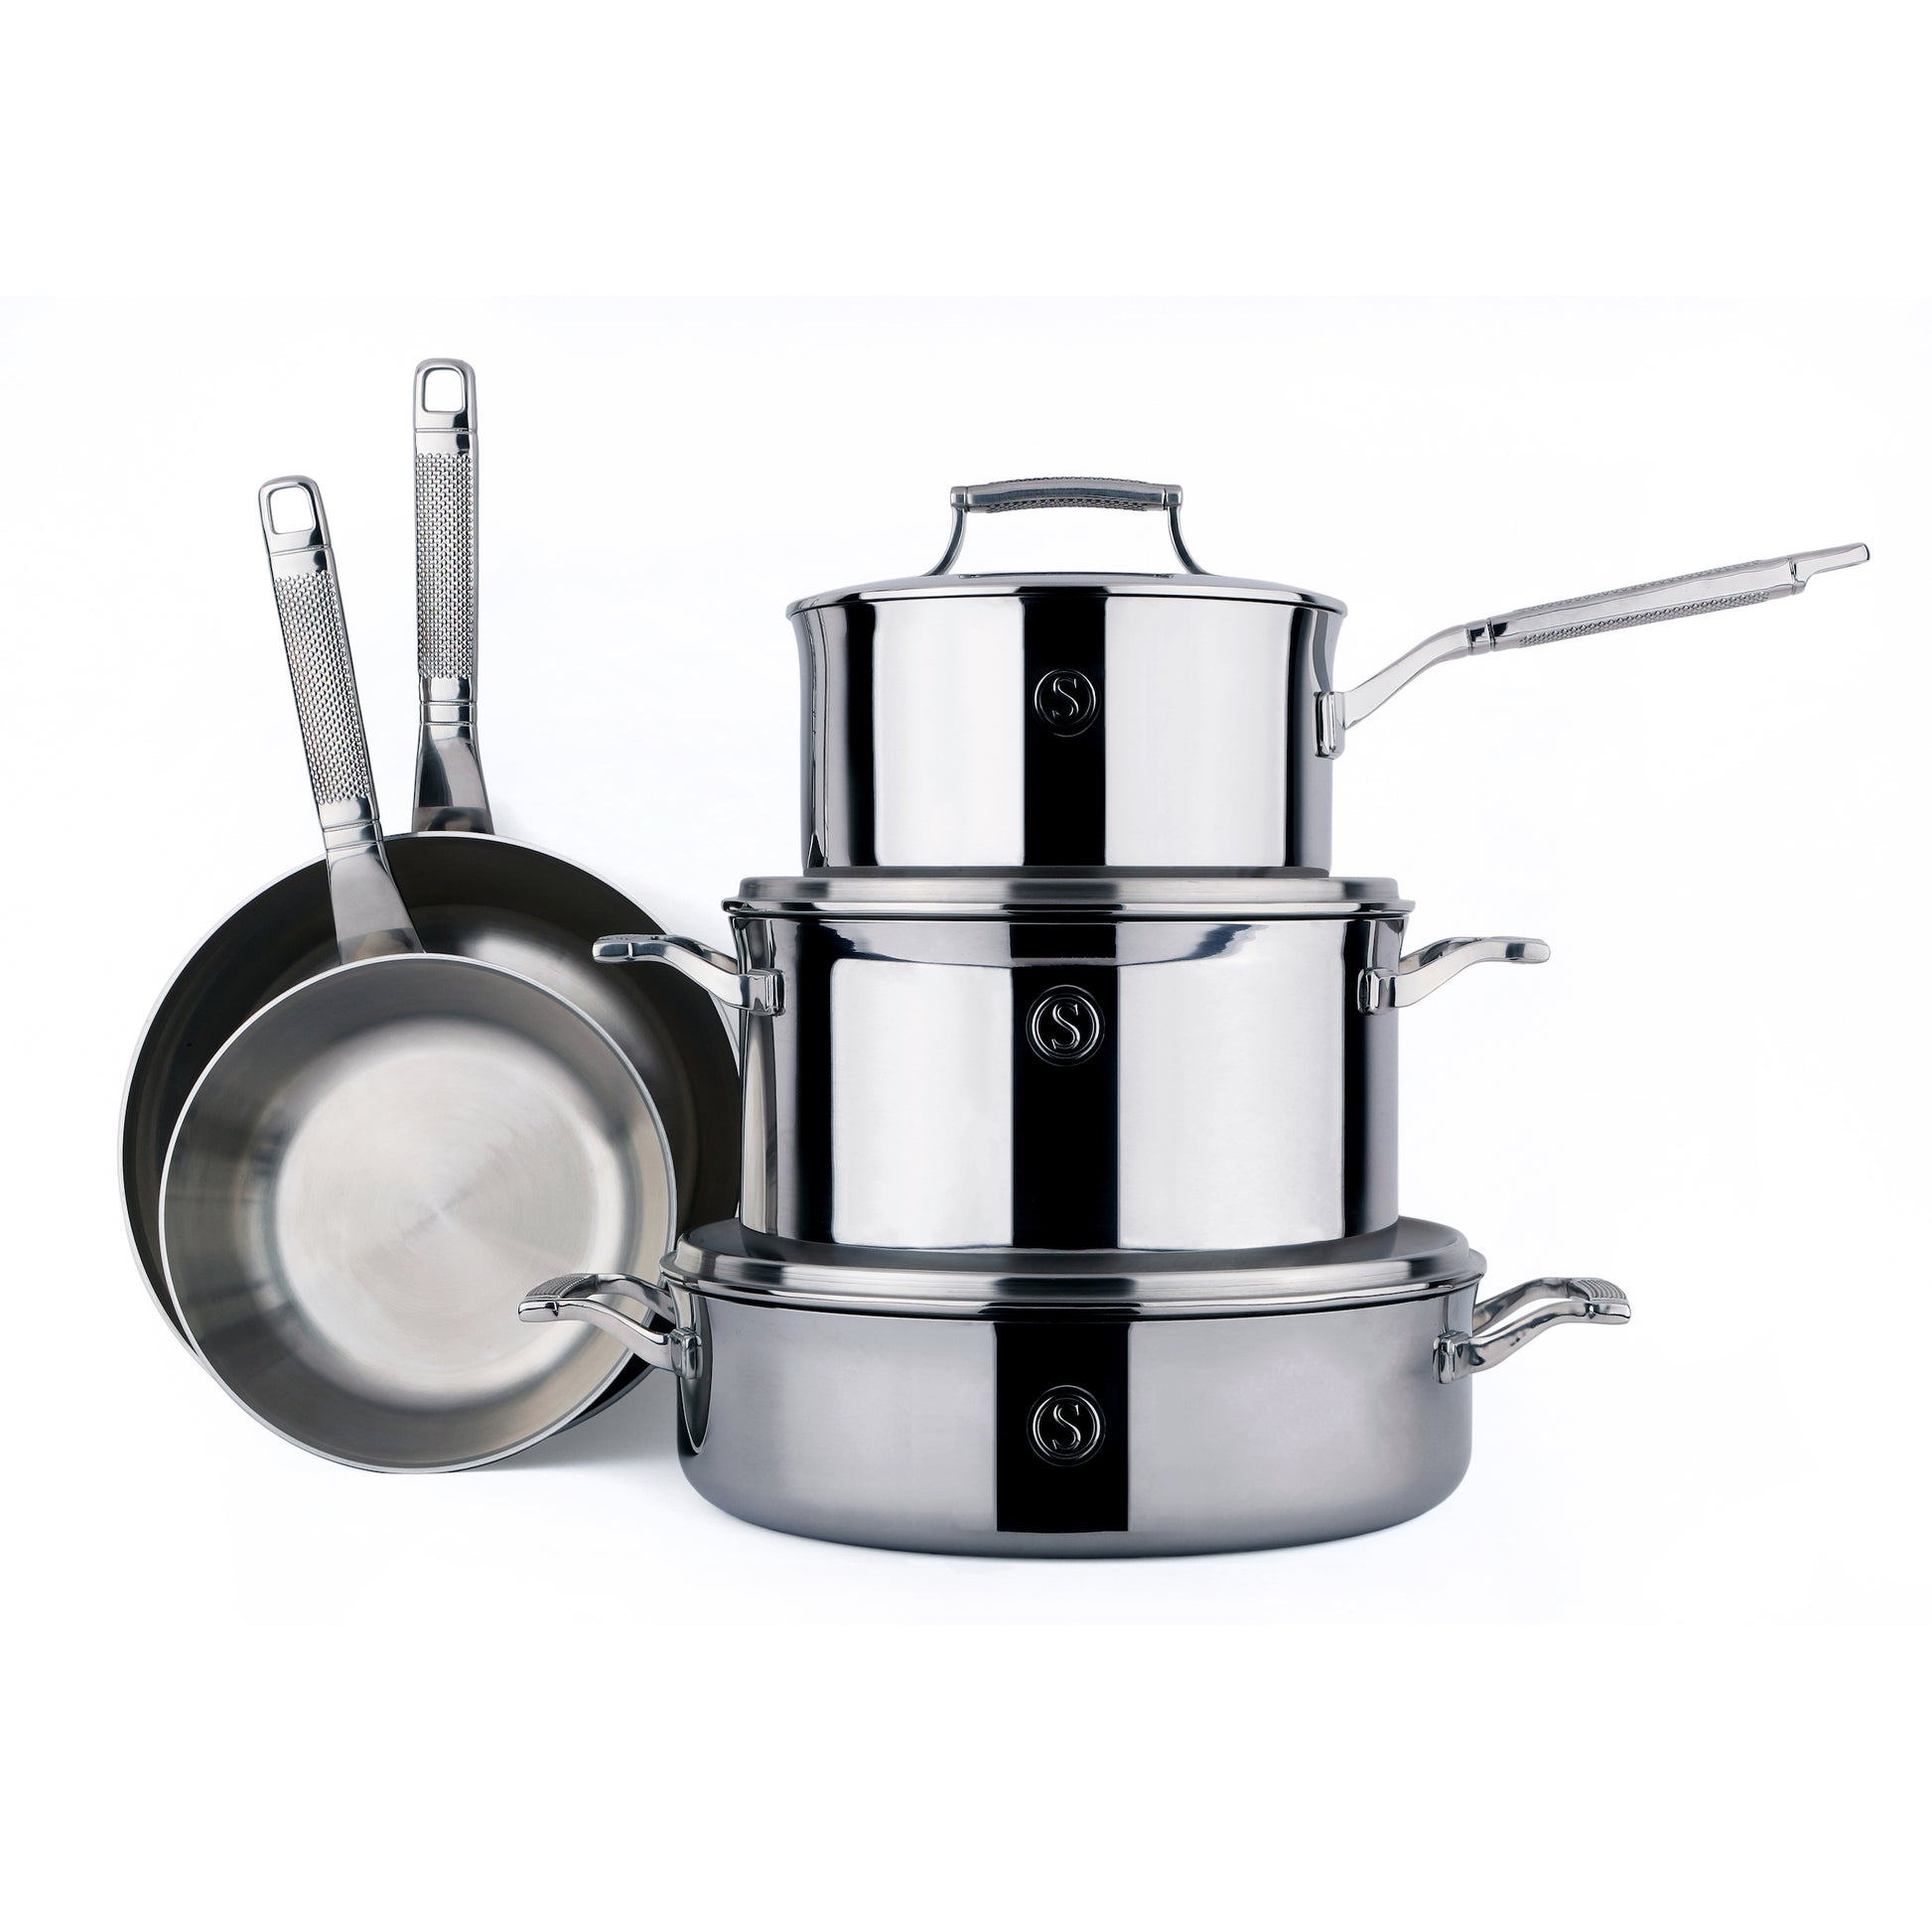 Classic Stainless Steel Cookware Set with Tri-Ply Base for Even